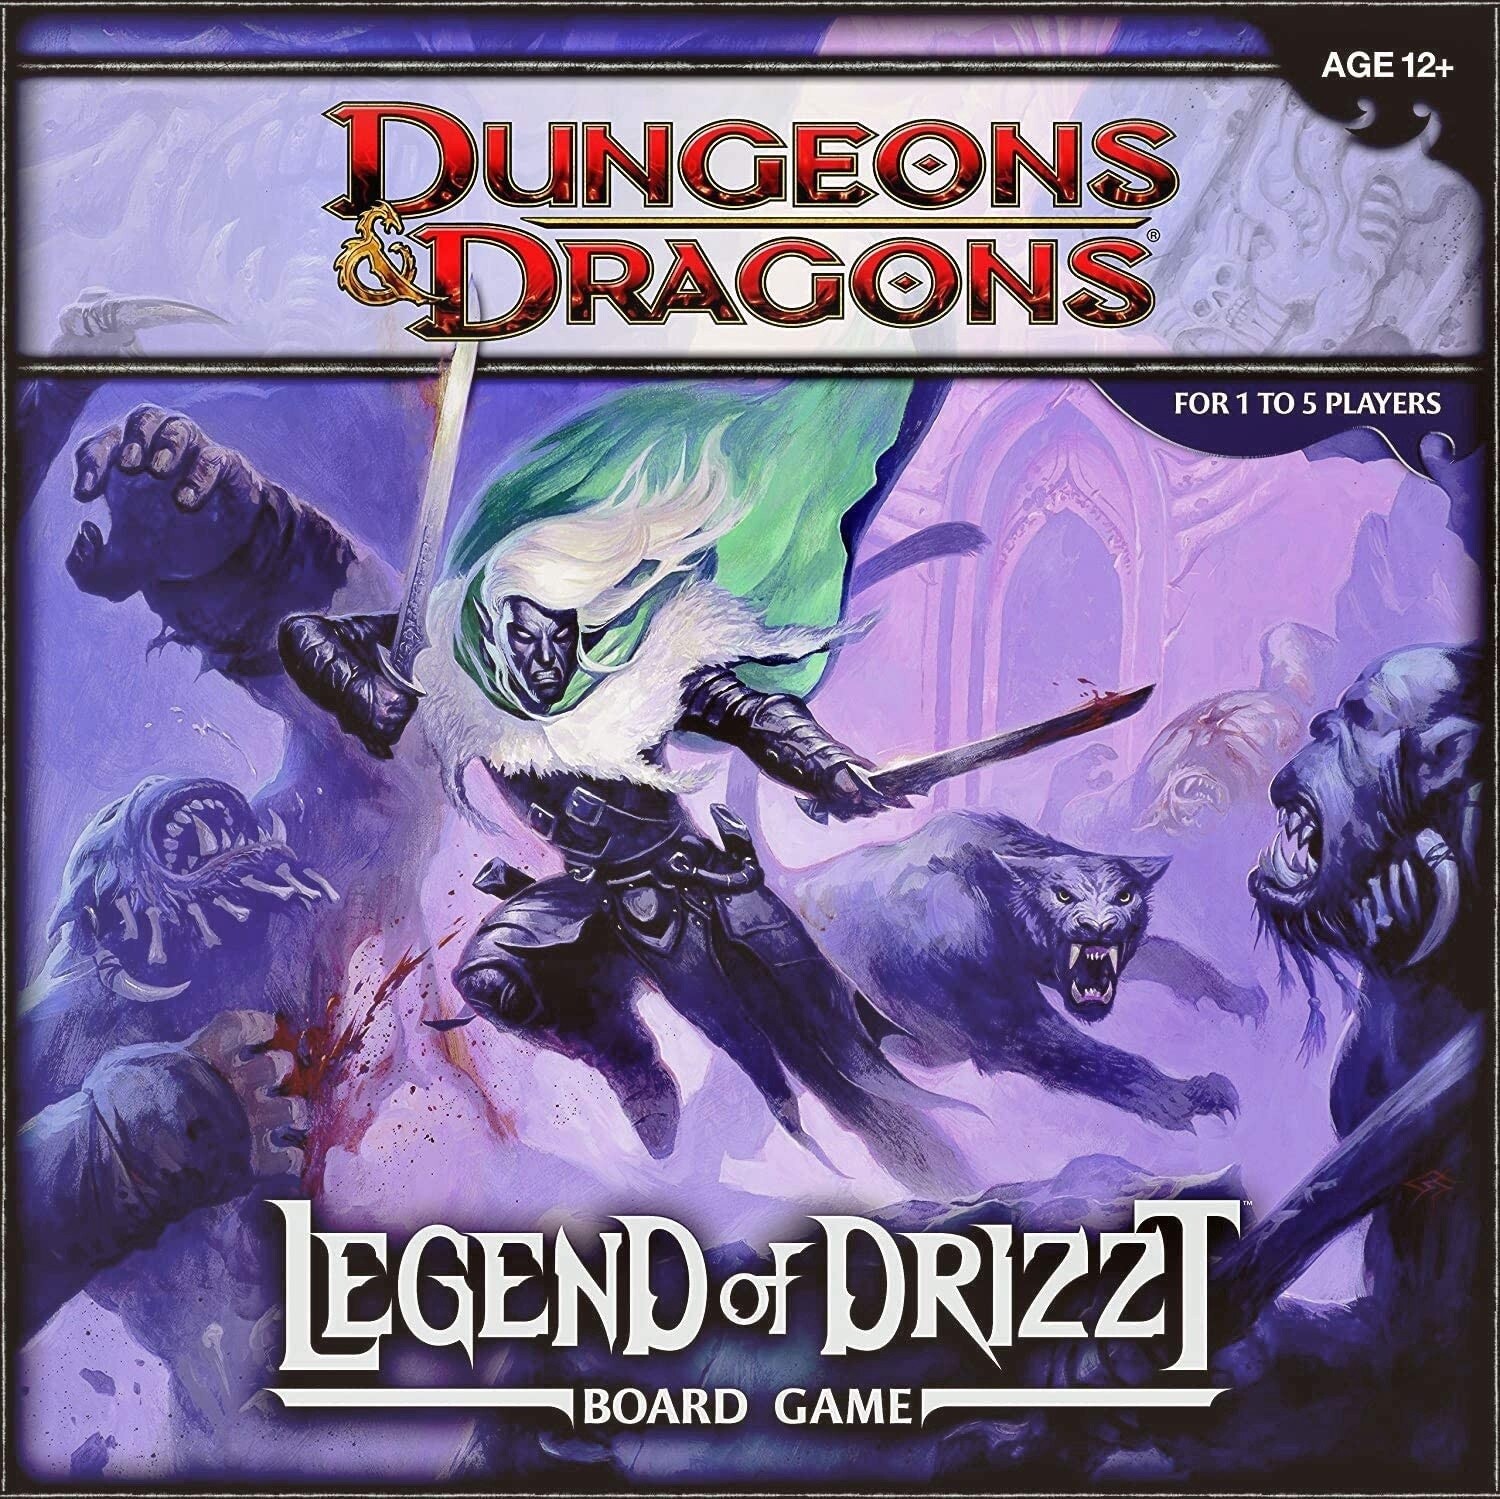 D&D The Legend of Drizzt Board Game